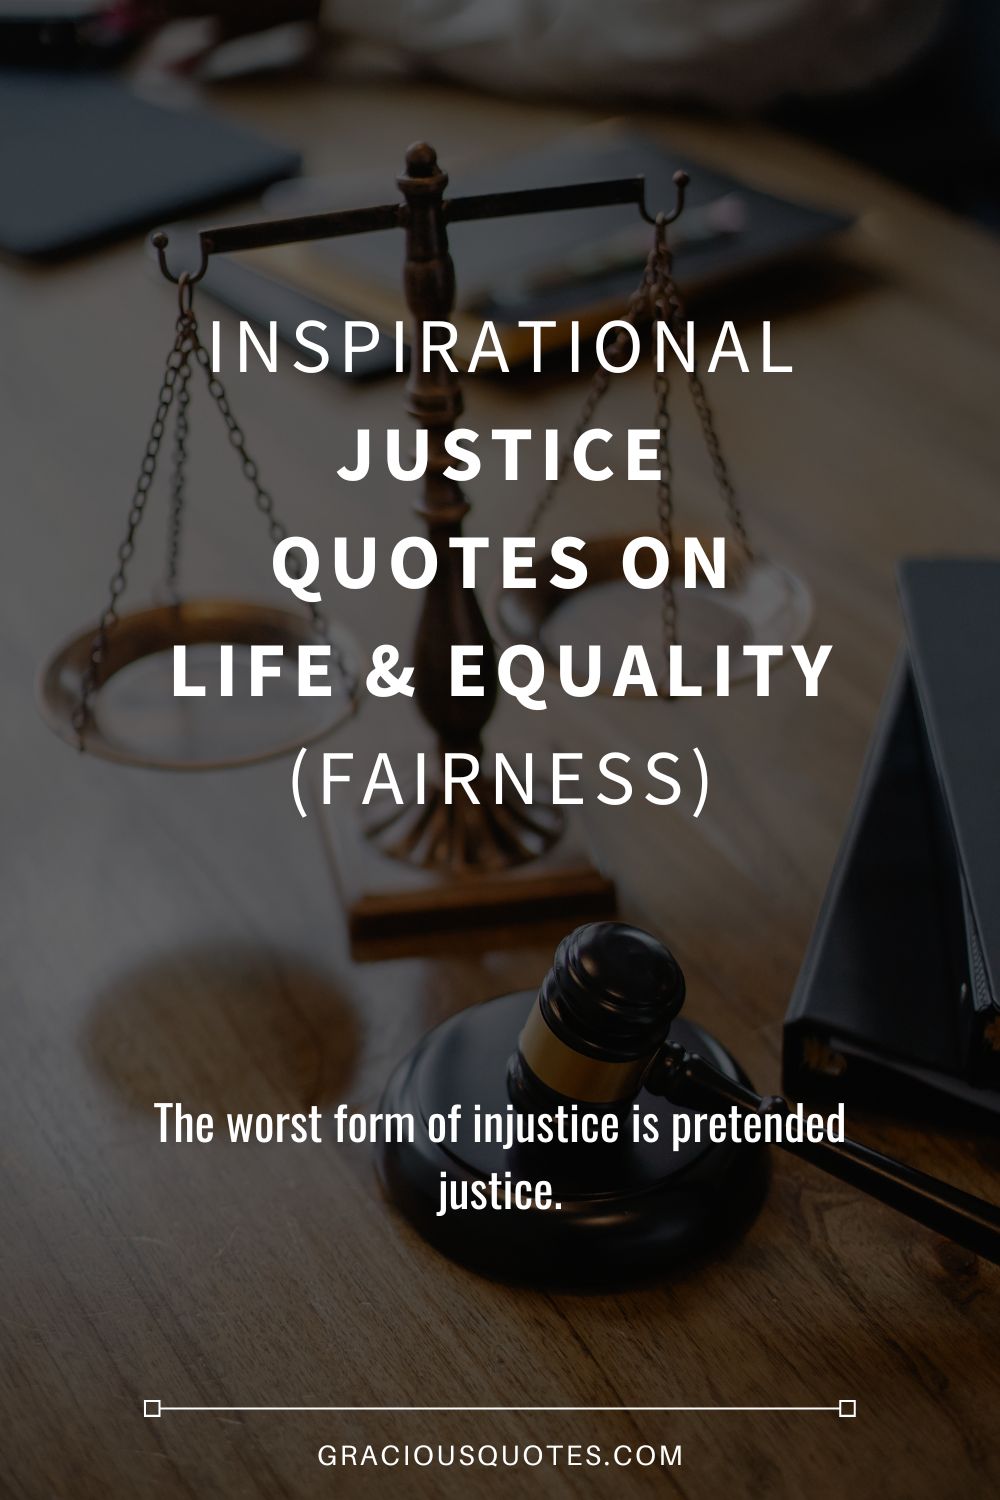 Inspirational Justice Quotes on Life & Equality (FAIRNESS) - Gracious Quotes